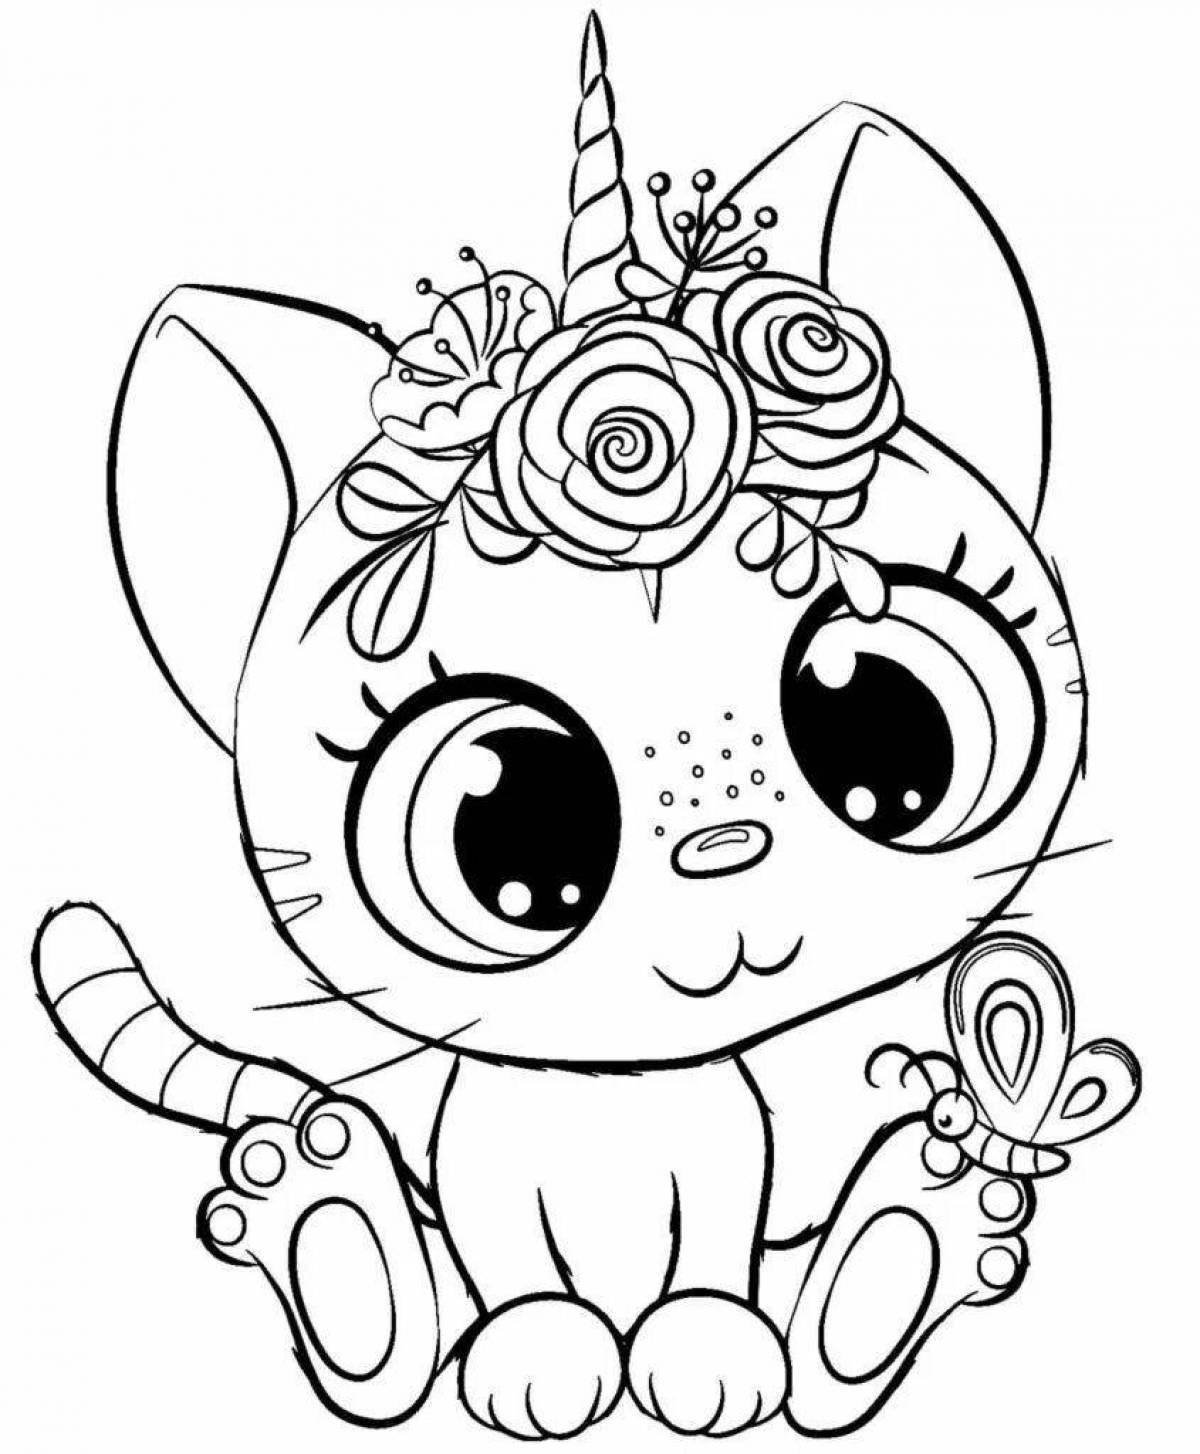 Adorable unicorn cat coloring book for girls